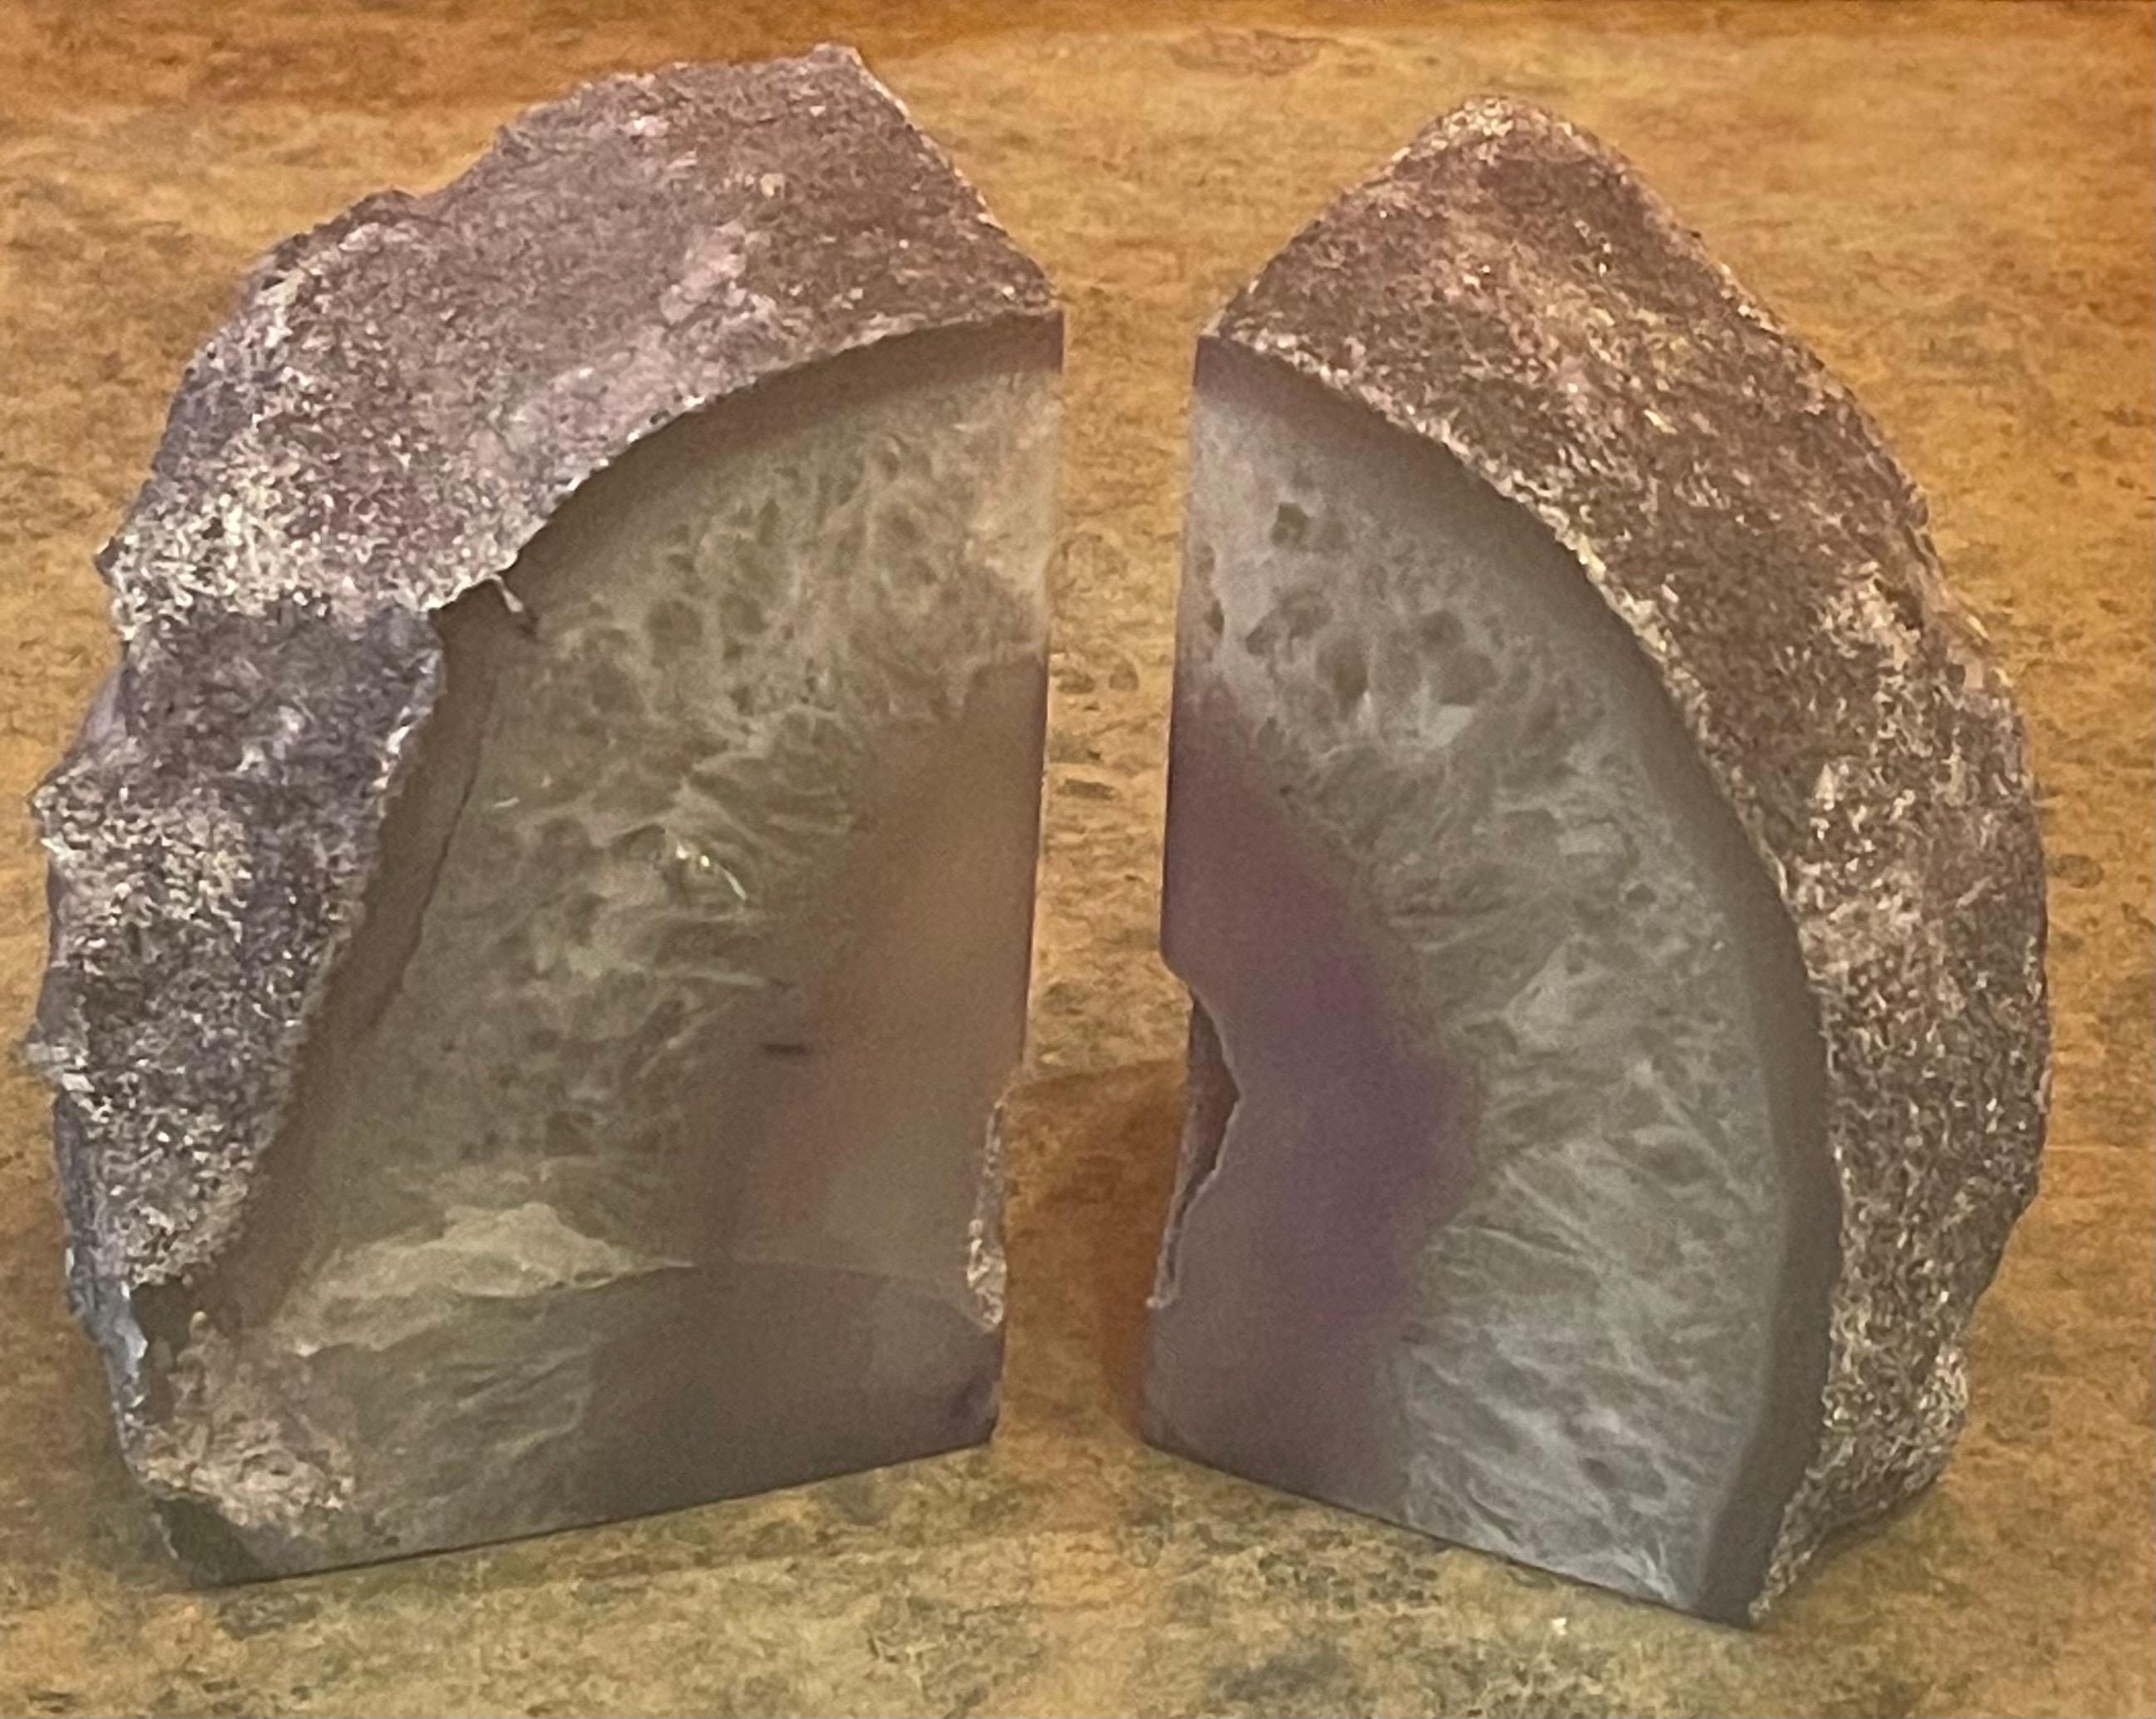 Versatile set of geode bookends, circa 1990s. Geode bookends can sit in two positions exposing different color options as show in images, beautiful purple and white colors. #1954.